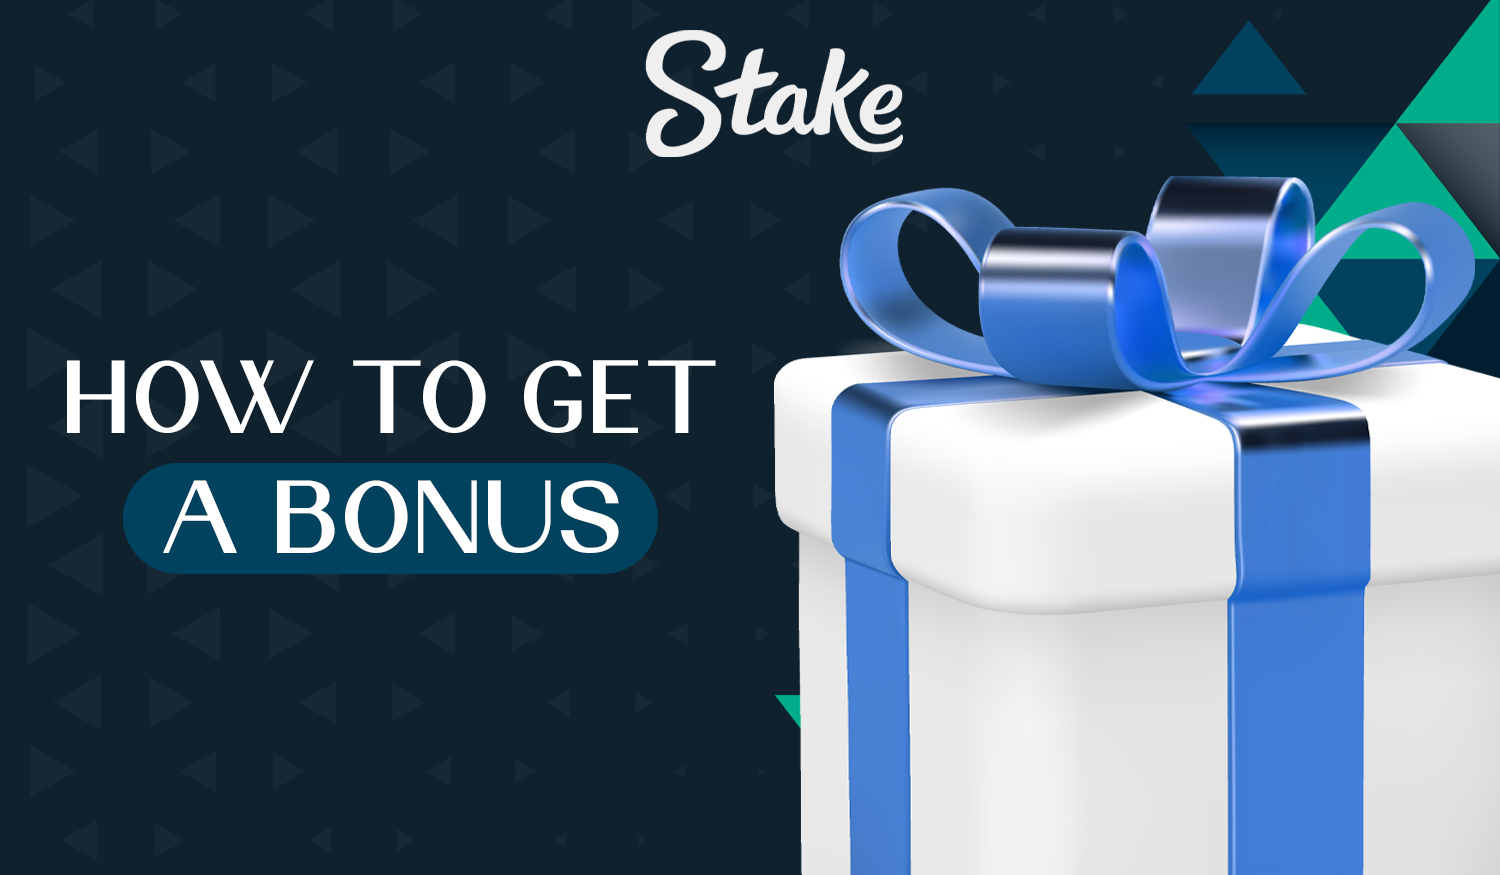 How Stake users can get generous bonuses from the company